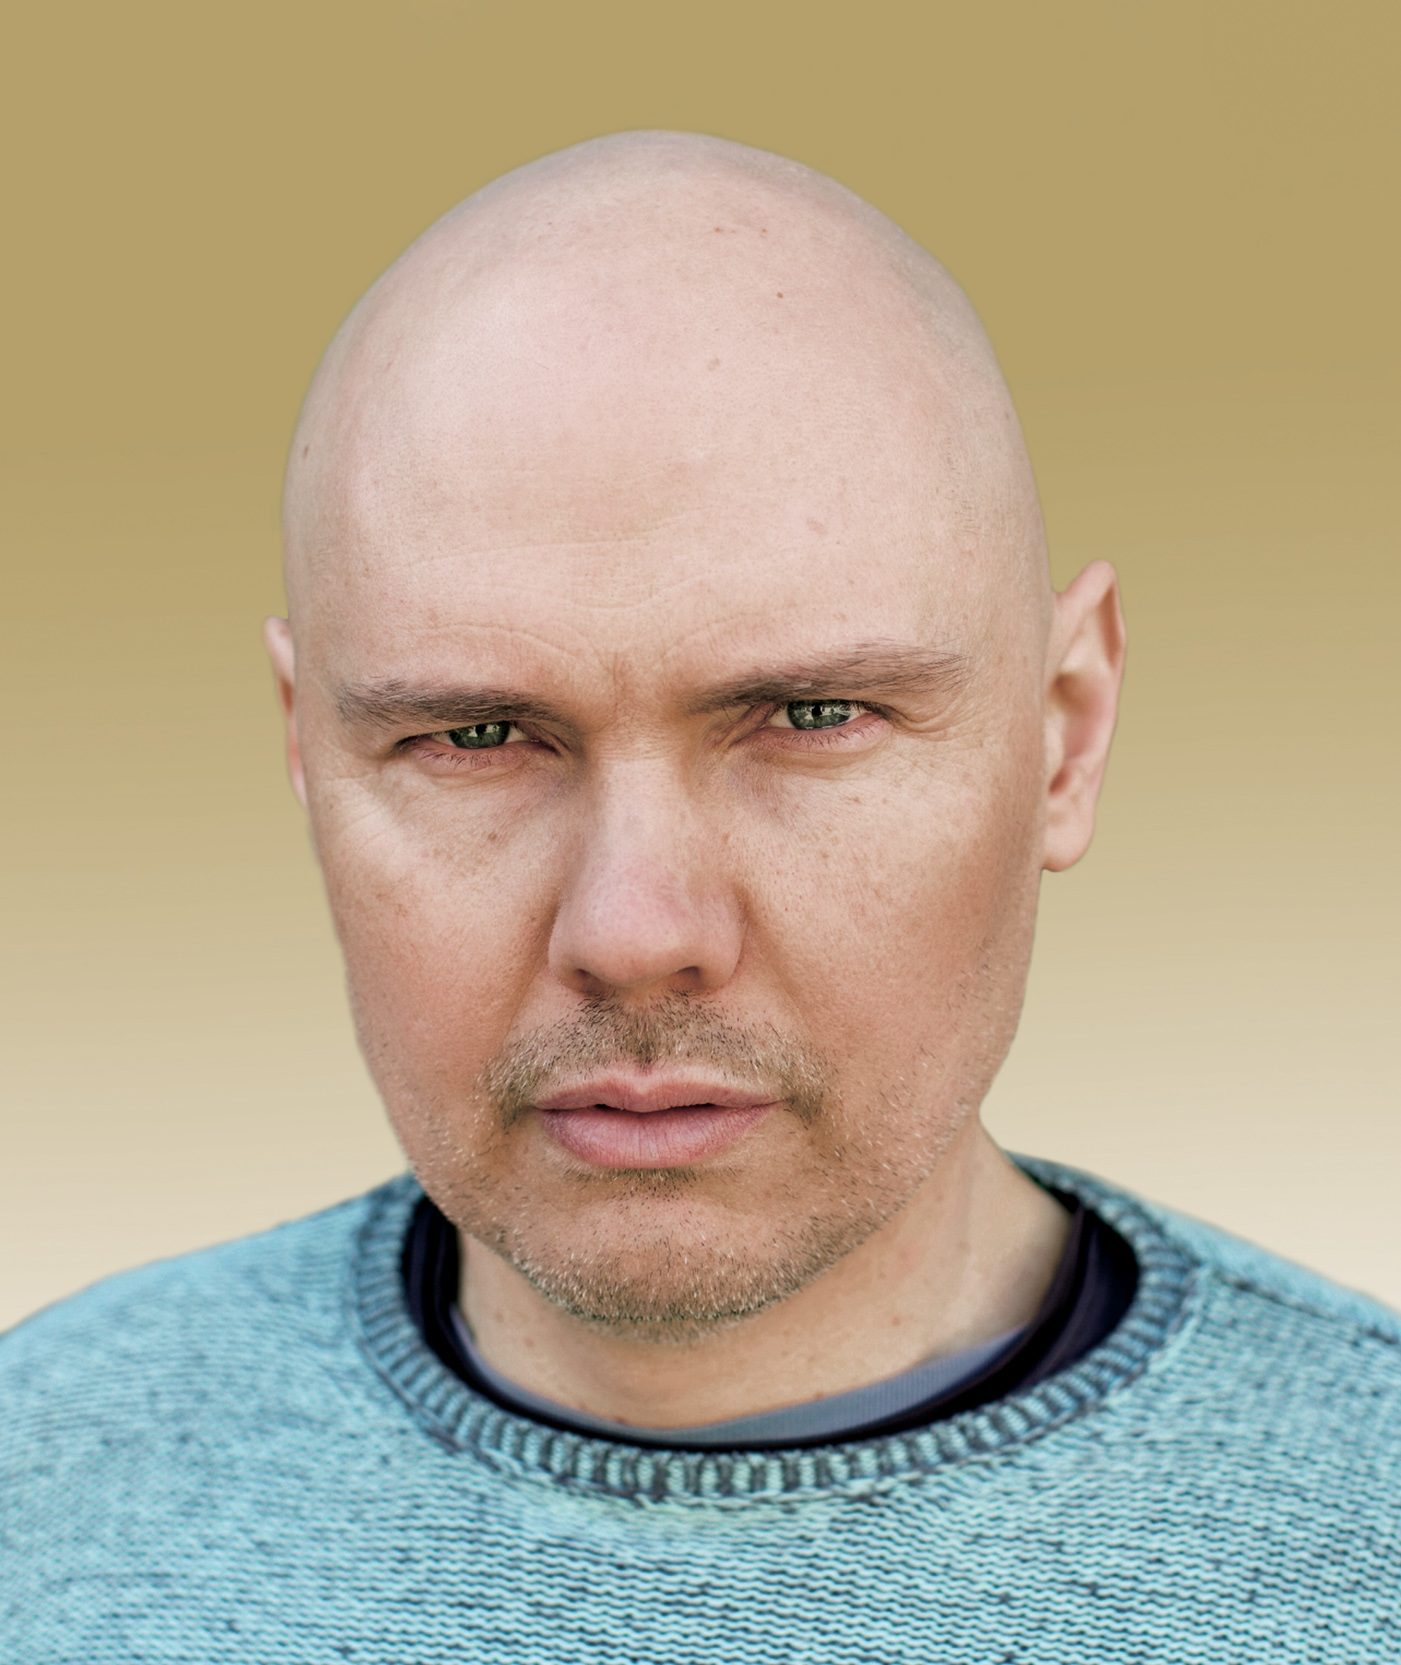 Billy Corgan Speaks About His Memories With His Father, The Early Days, AI & What's To Come